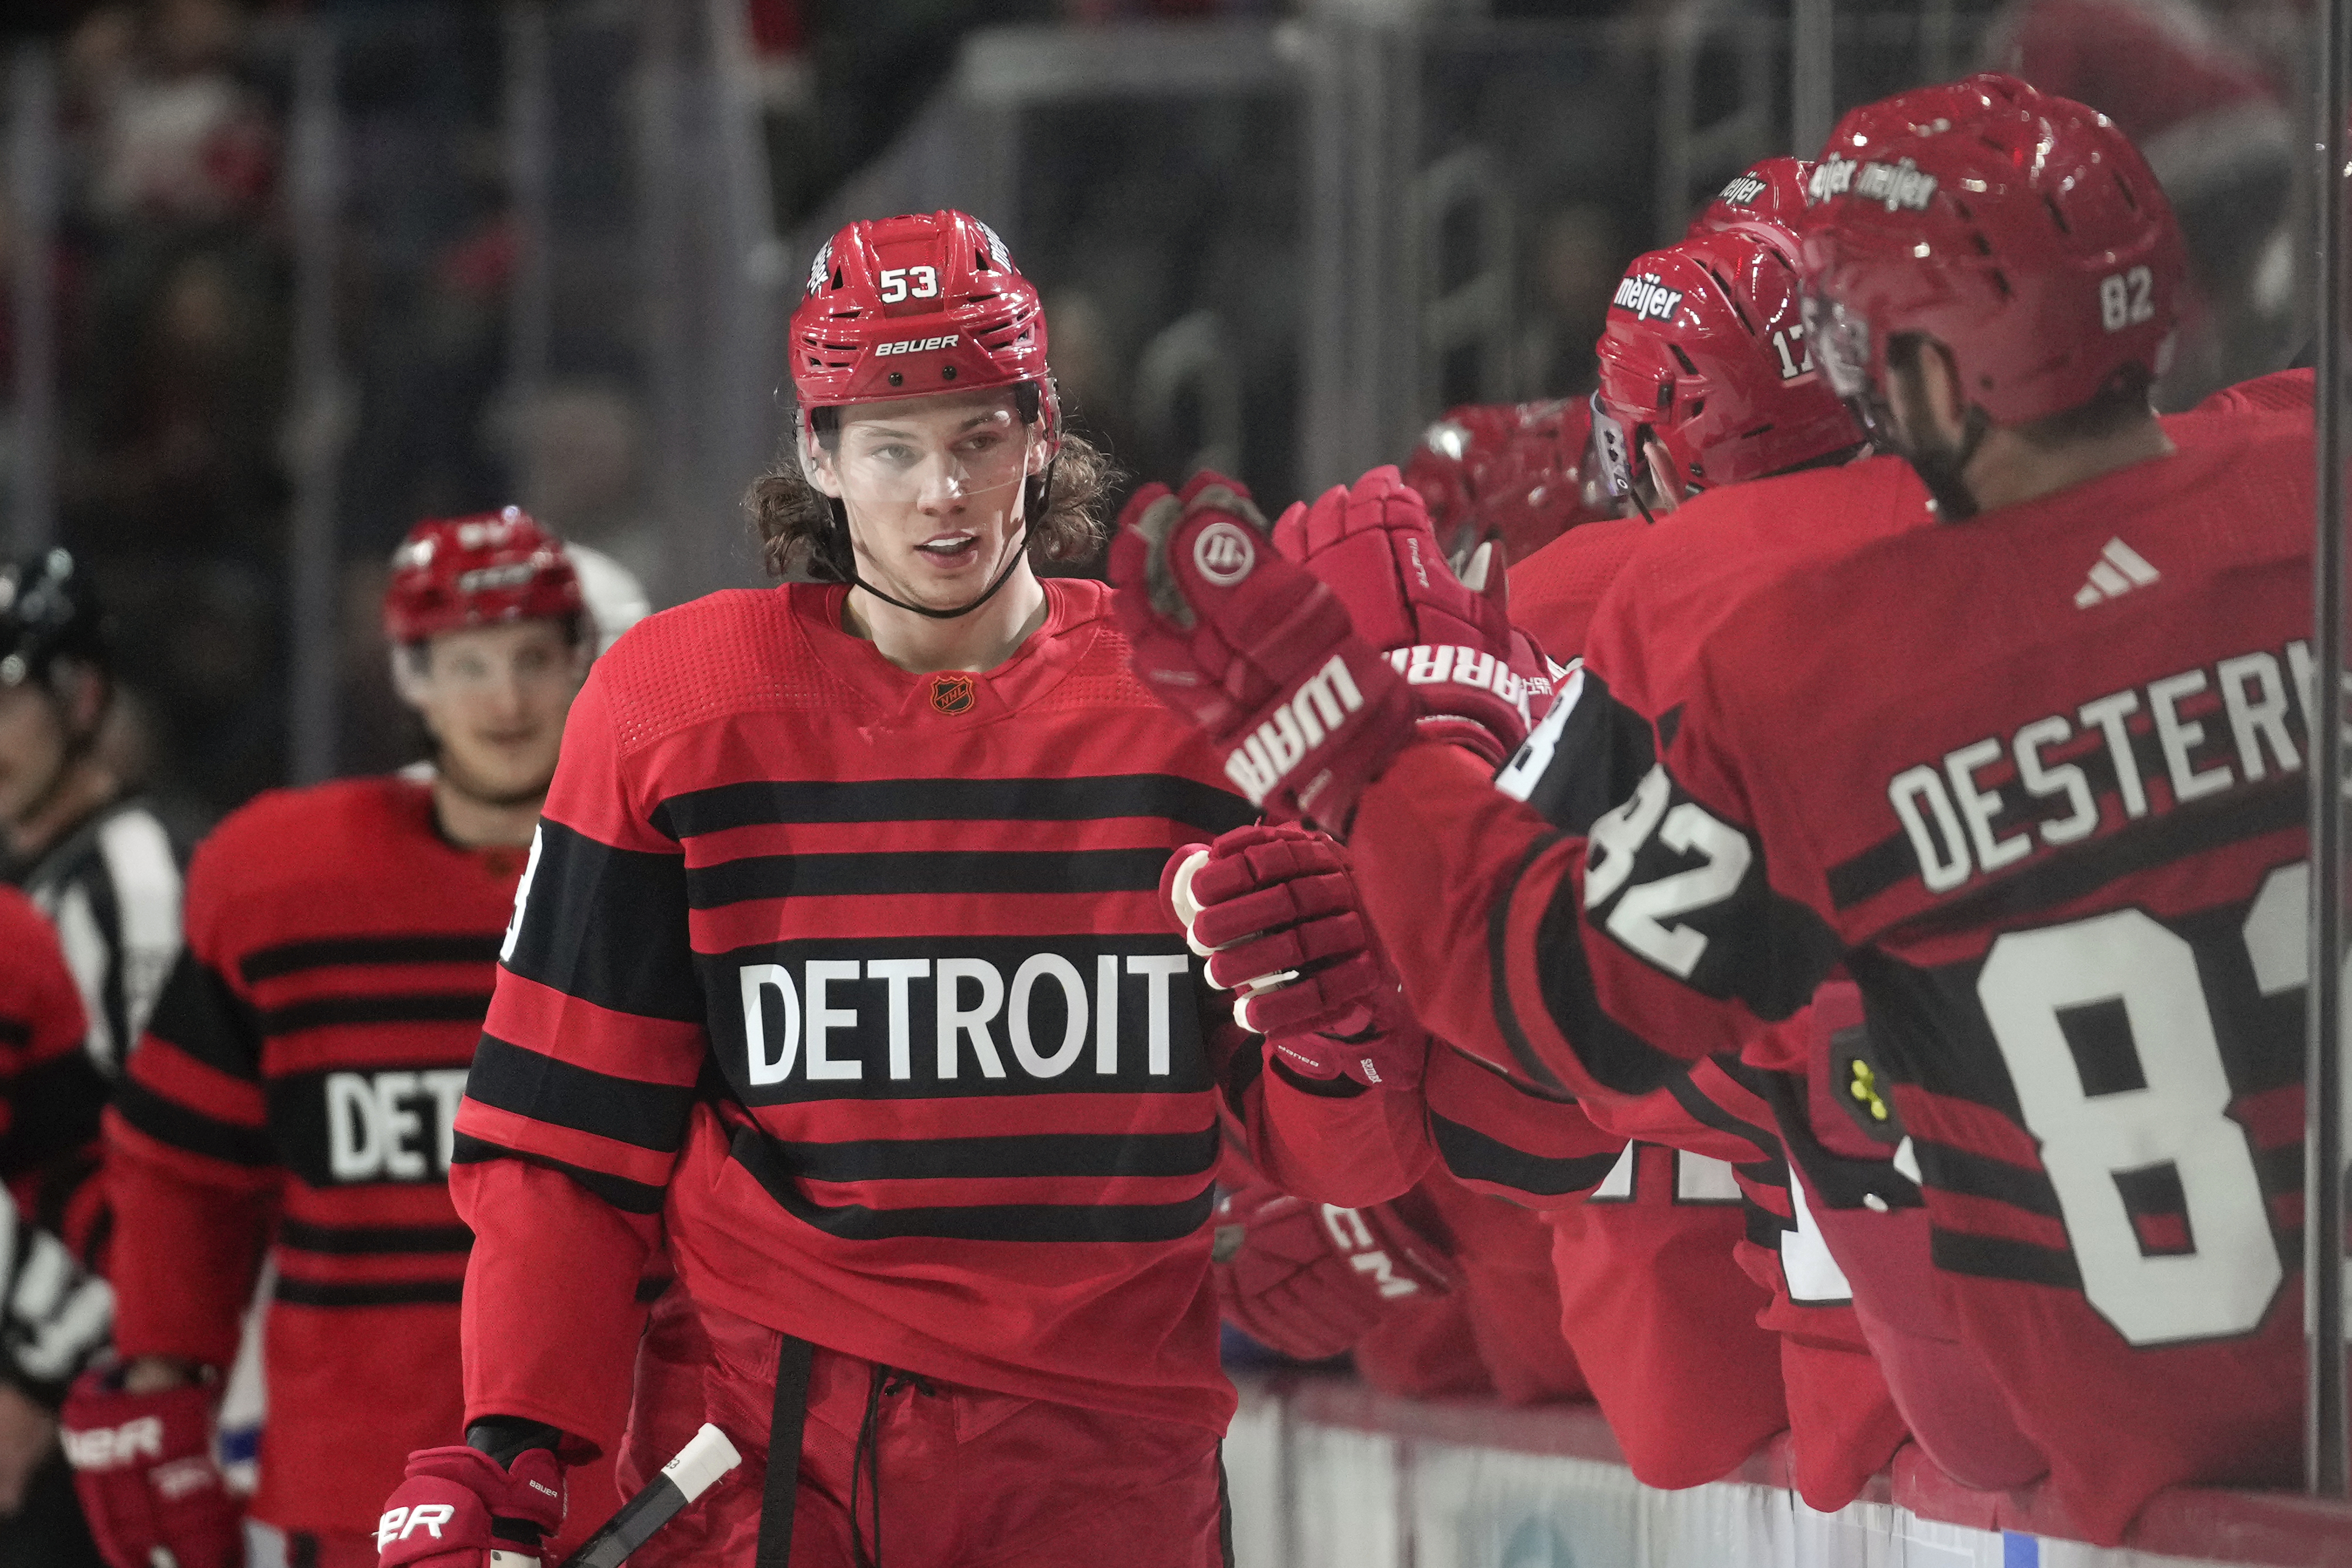 How the Red Wings' Moritz Seider's audacity and maturity led him